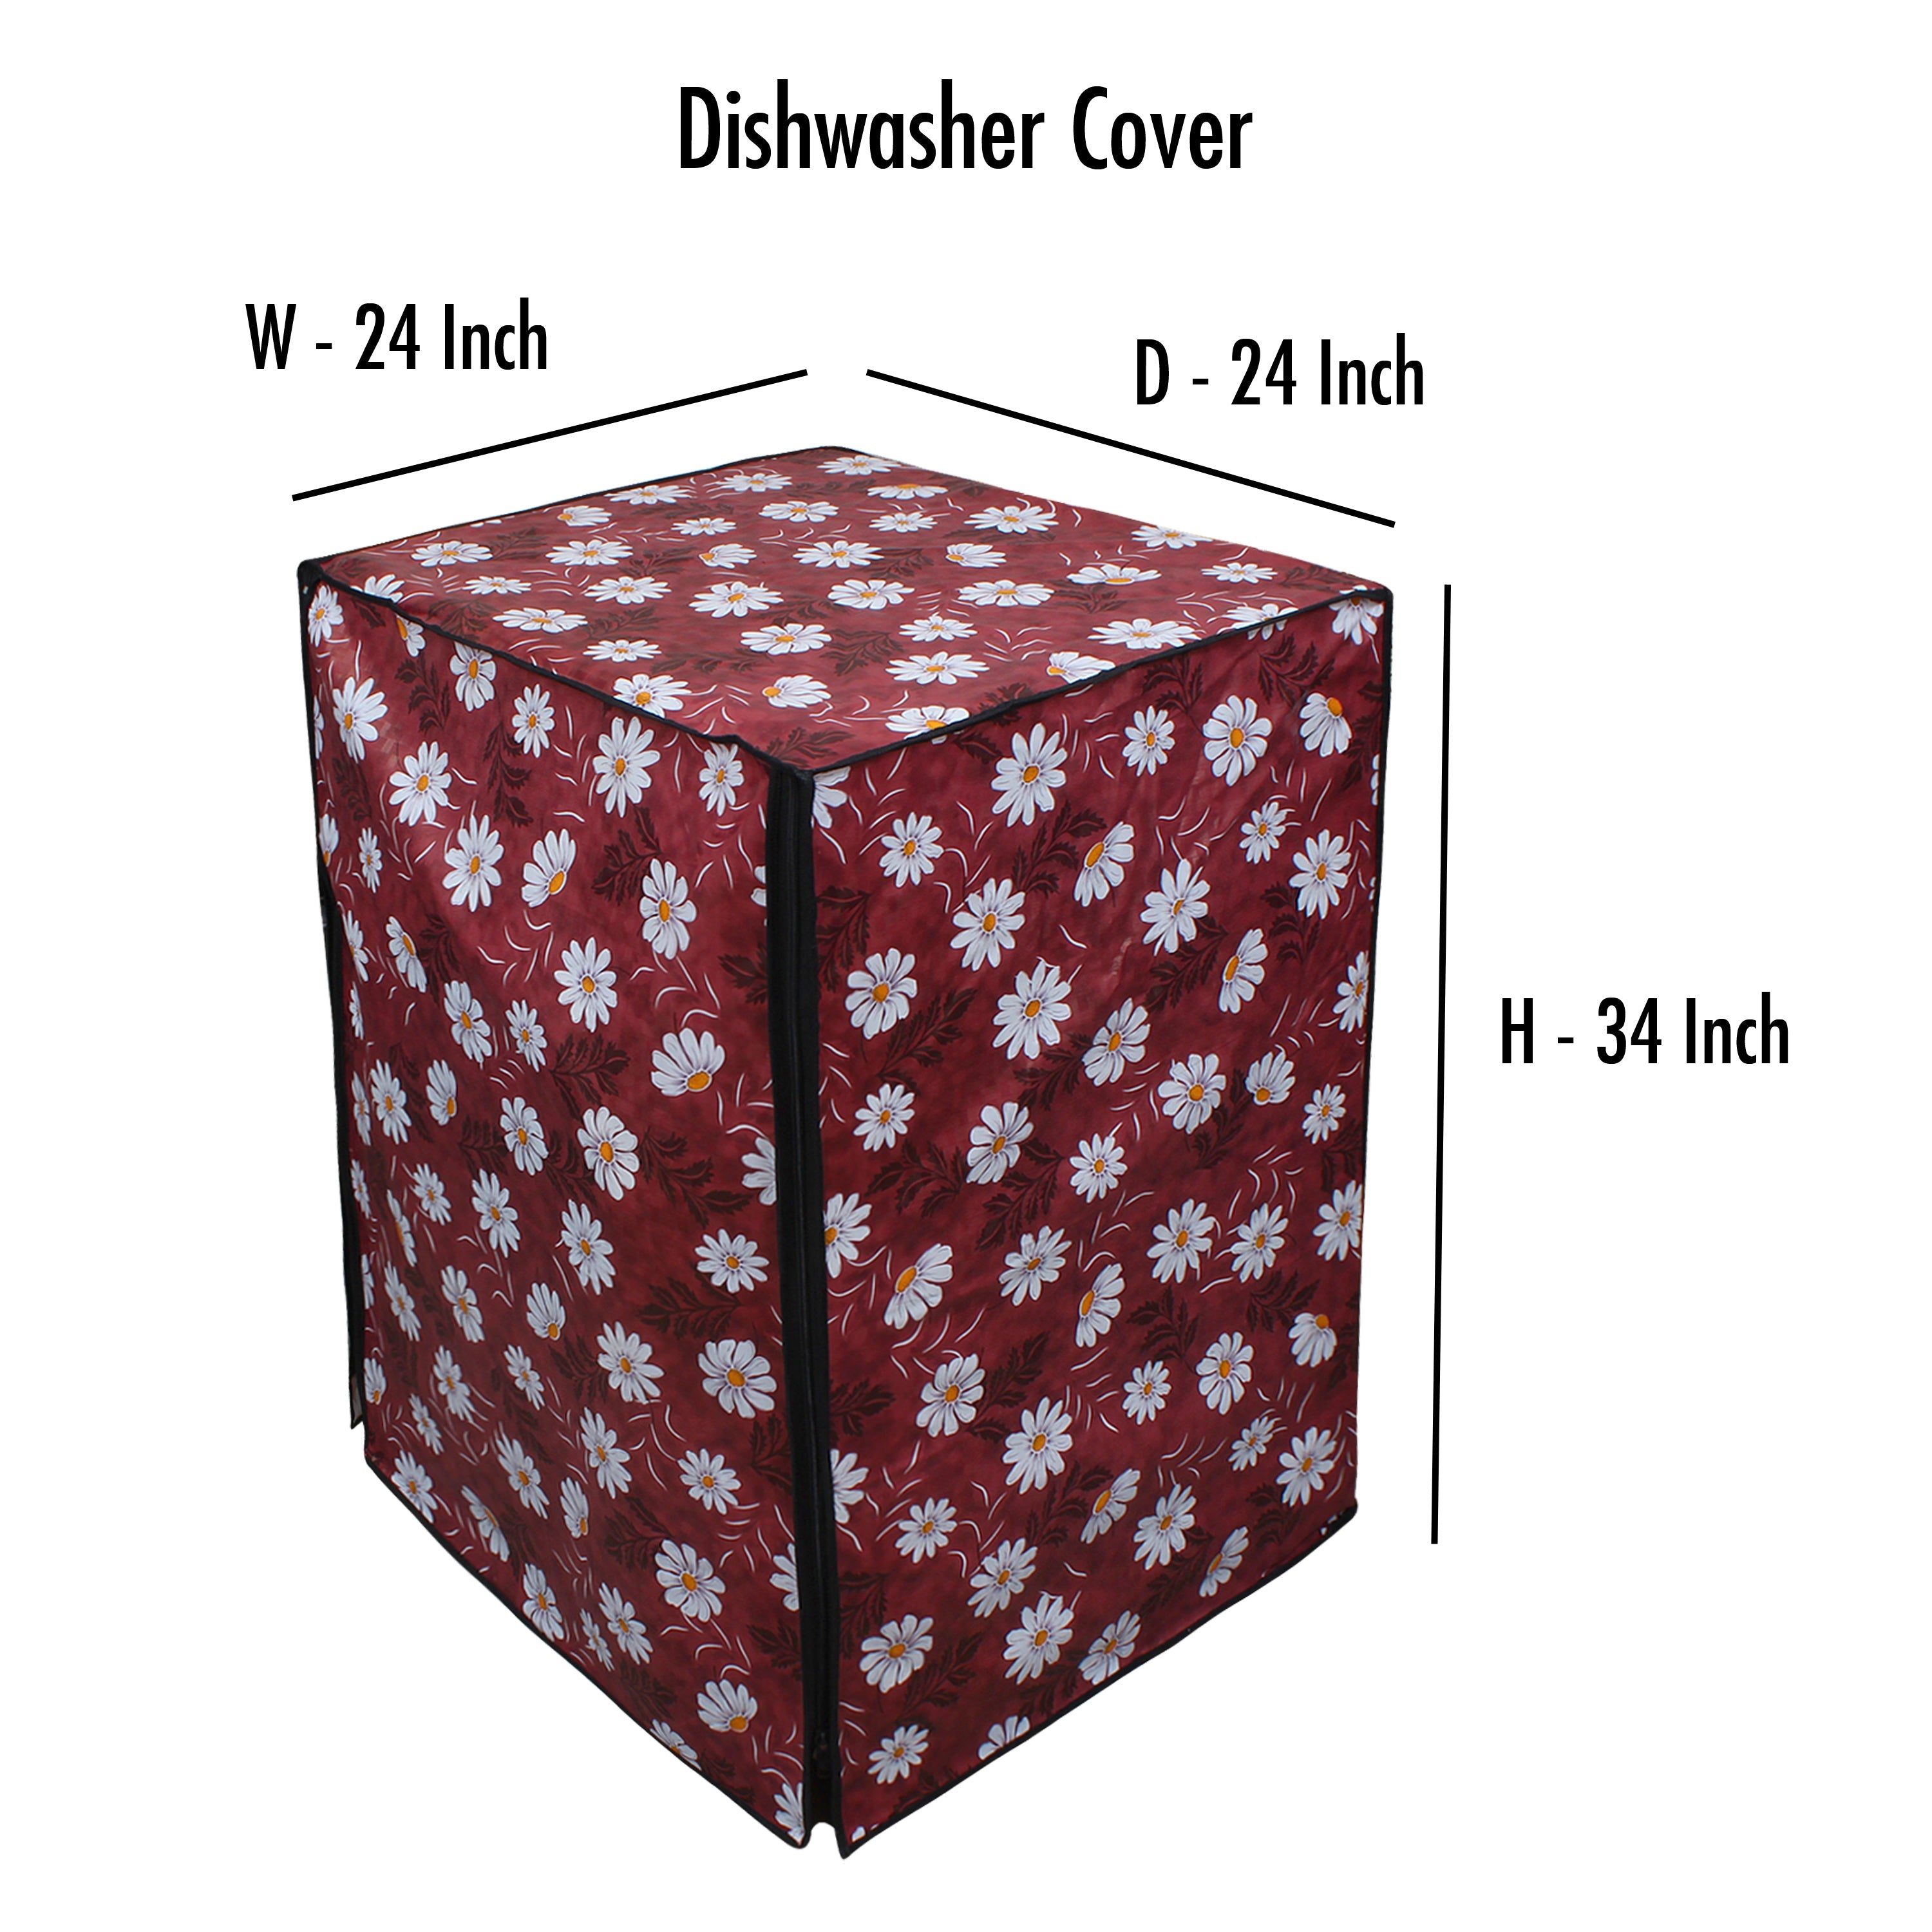 Waterproof and Dustproof Dishwasher Cover, SA08 - Dream Care Furnishings Private Limited